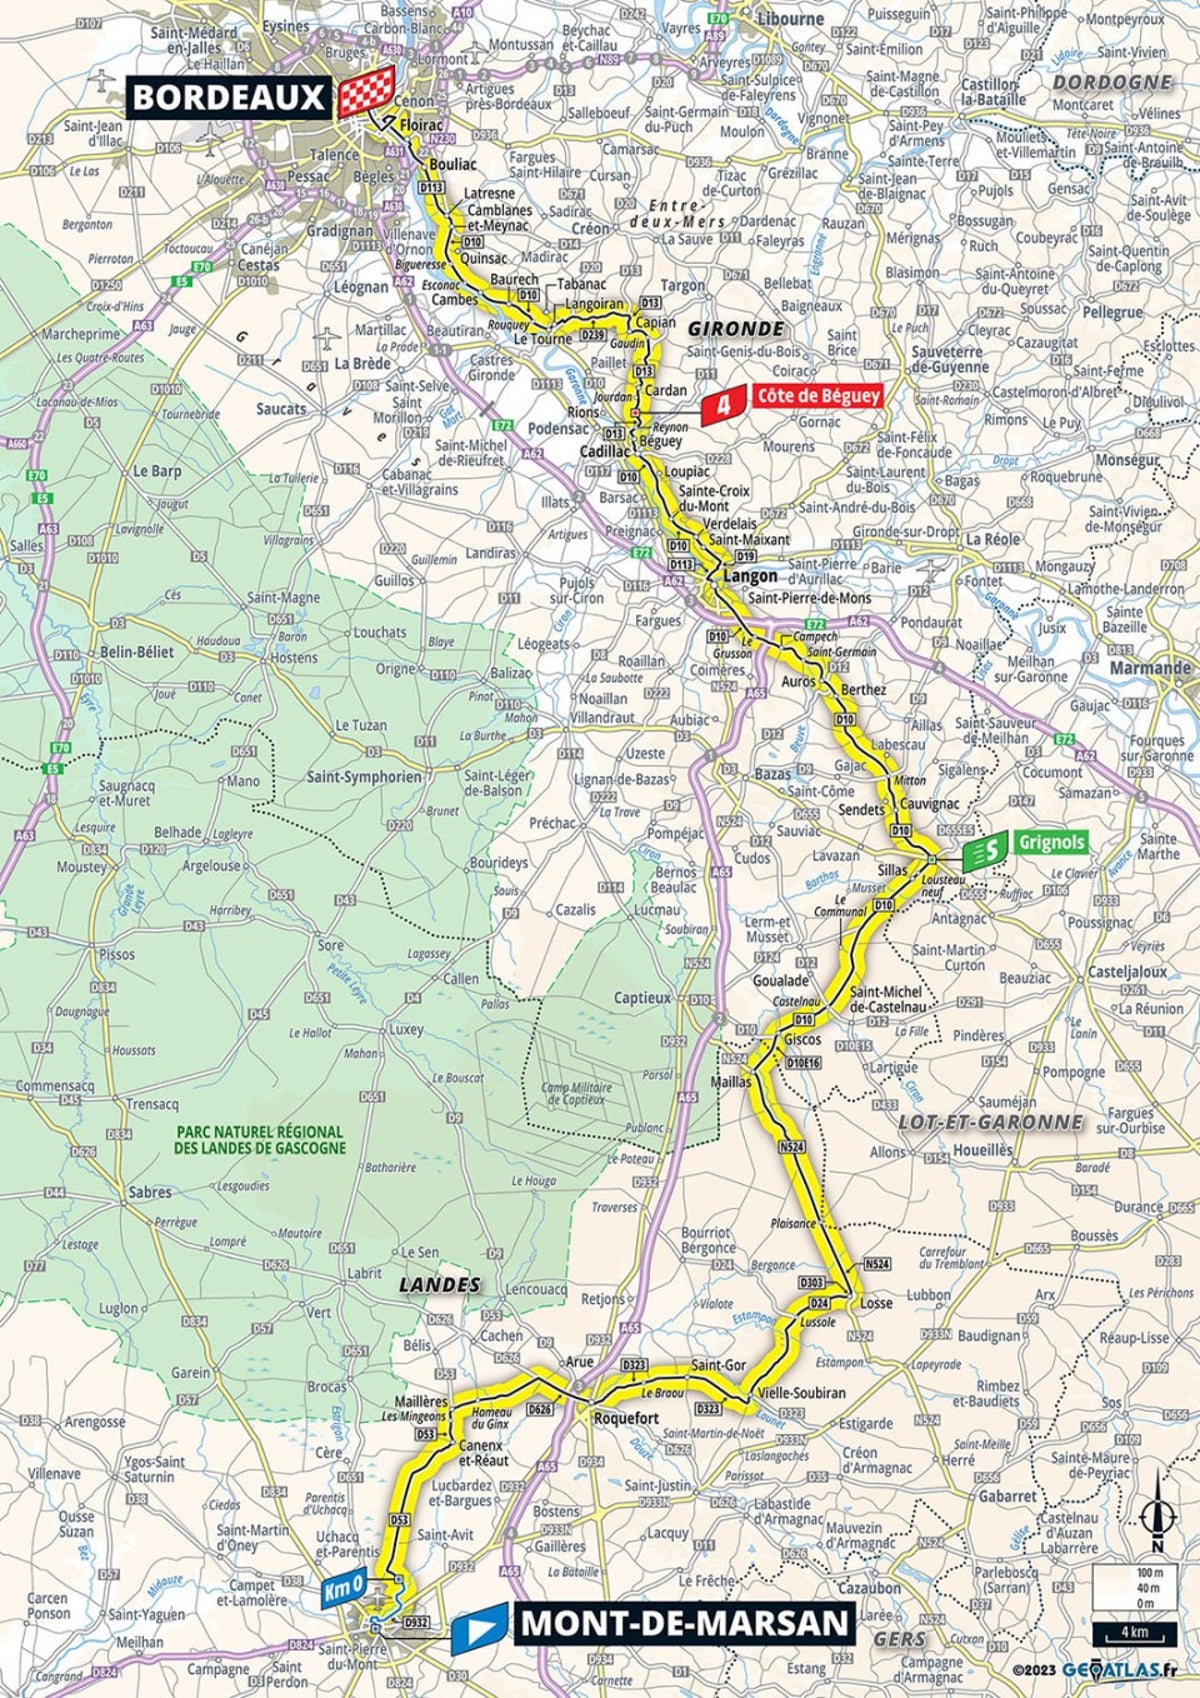 Tour de France 2023 stage 7 preview: Route map and profile of 145km from Mont de Marsan to Bordeaux